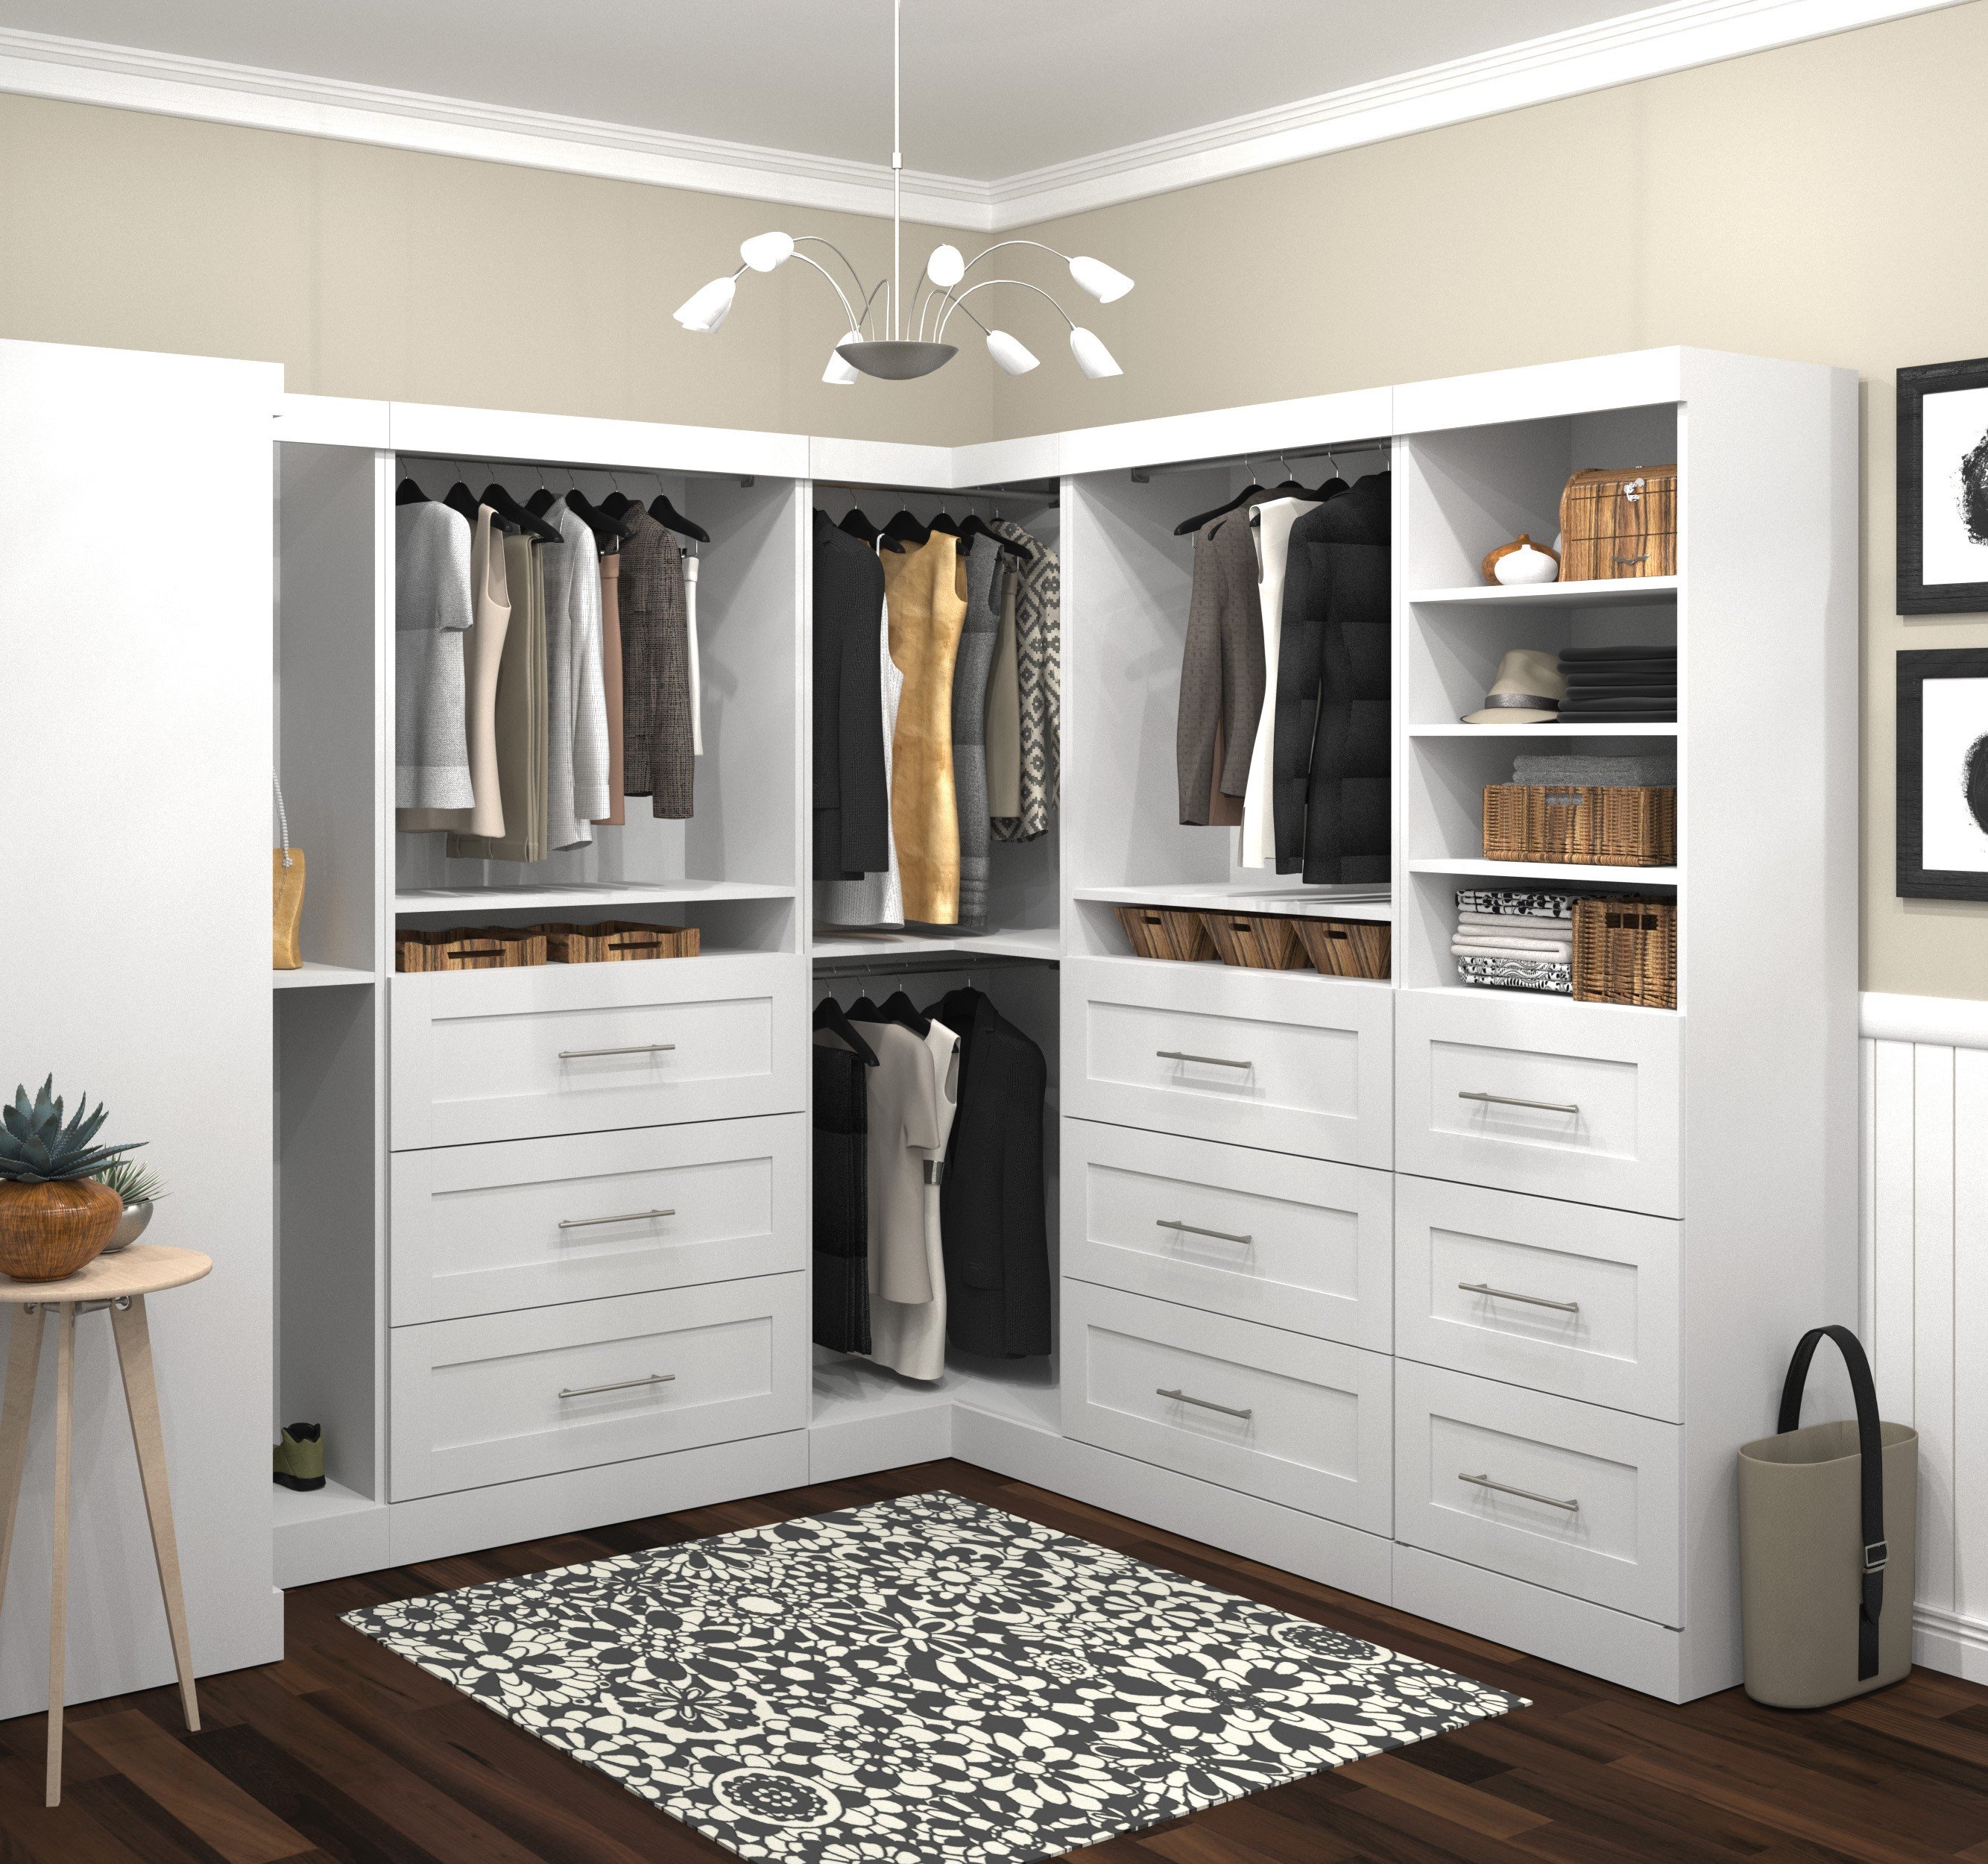 Bestar Optimum Kit Including 9 Drawers With Simple Pullolding Detail In White, L Shaped Dresser